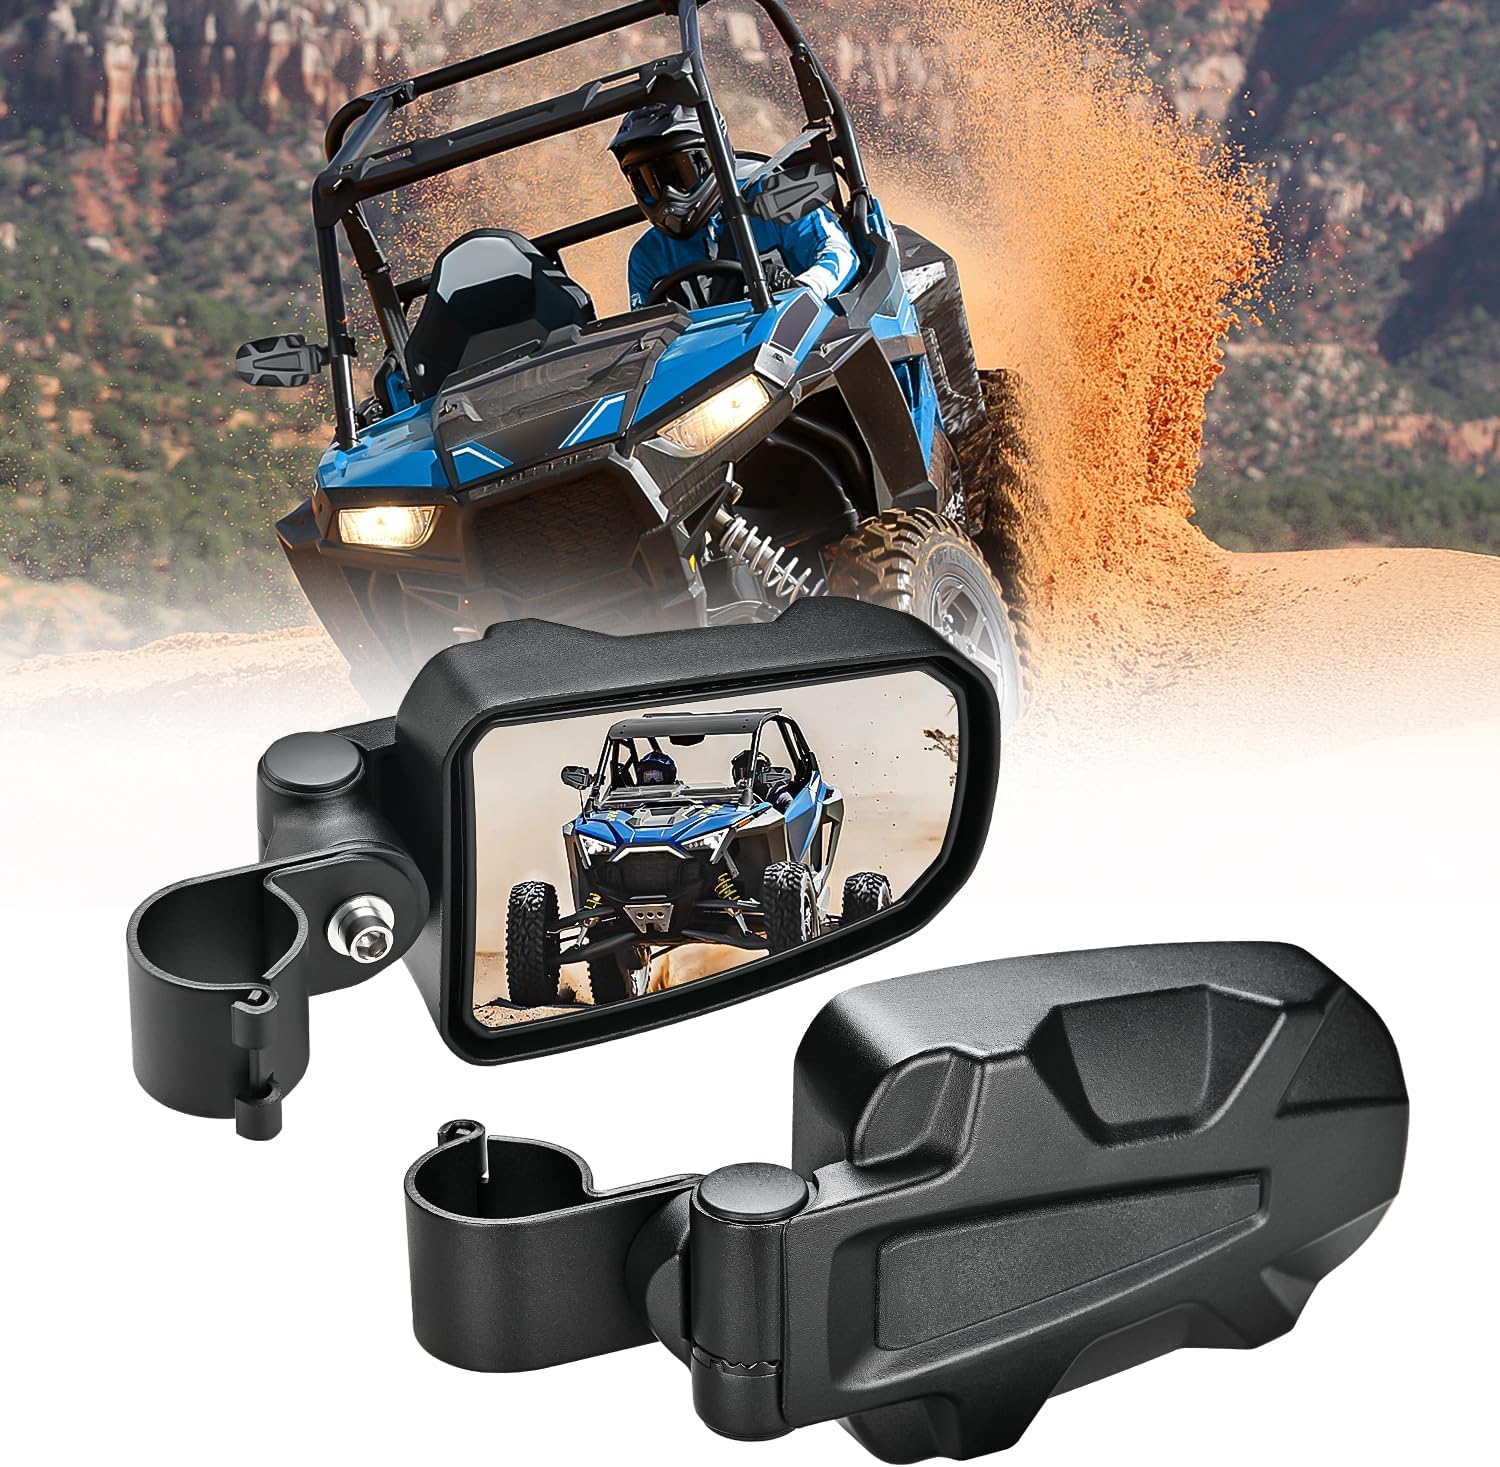 UTV Side Mirrors Offroad Rear View Universal Fits with Windshield for 1.75inch Roll Cage Polaris Ranger RZR Pioneer Can-Am Commander Kawasaki Yamaha Cfmoto Nilight